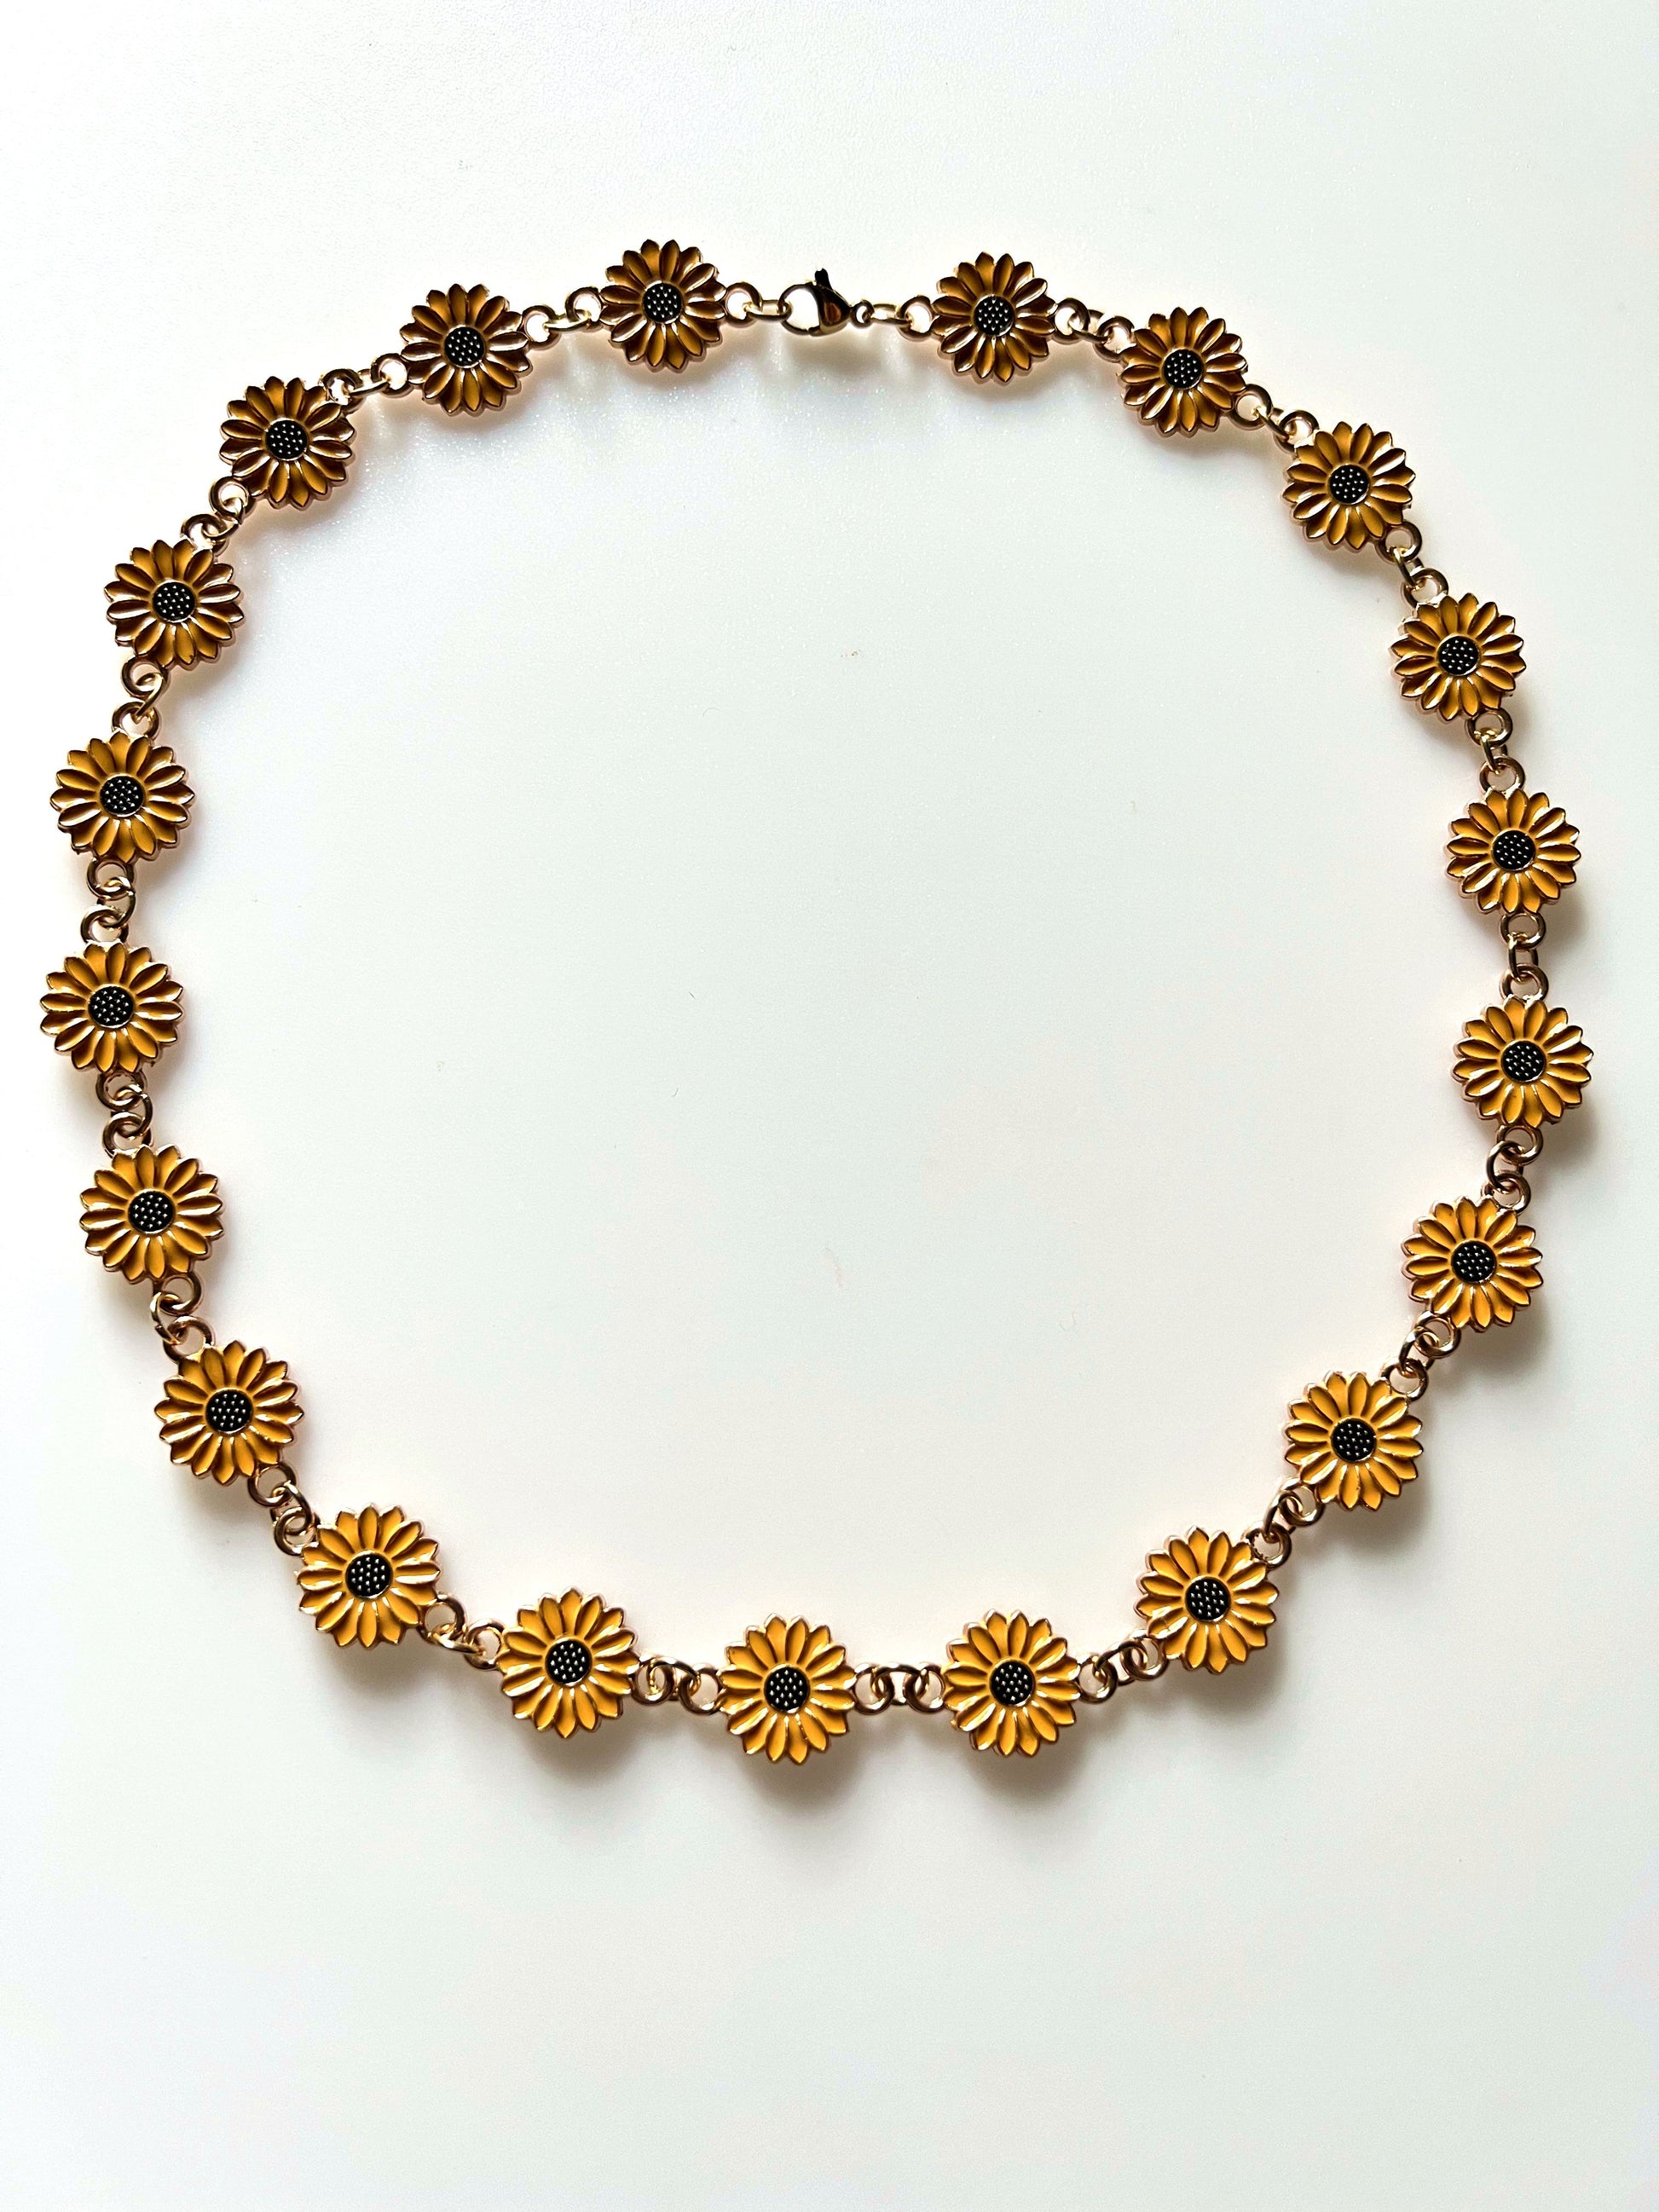 Creative Elegant Dripping Oil Sunflower Chain Necklace Fashion Enamel Small Daisy Statement Necklaces For Women Jewelry - Charlie Dolly